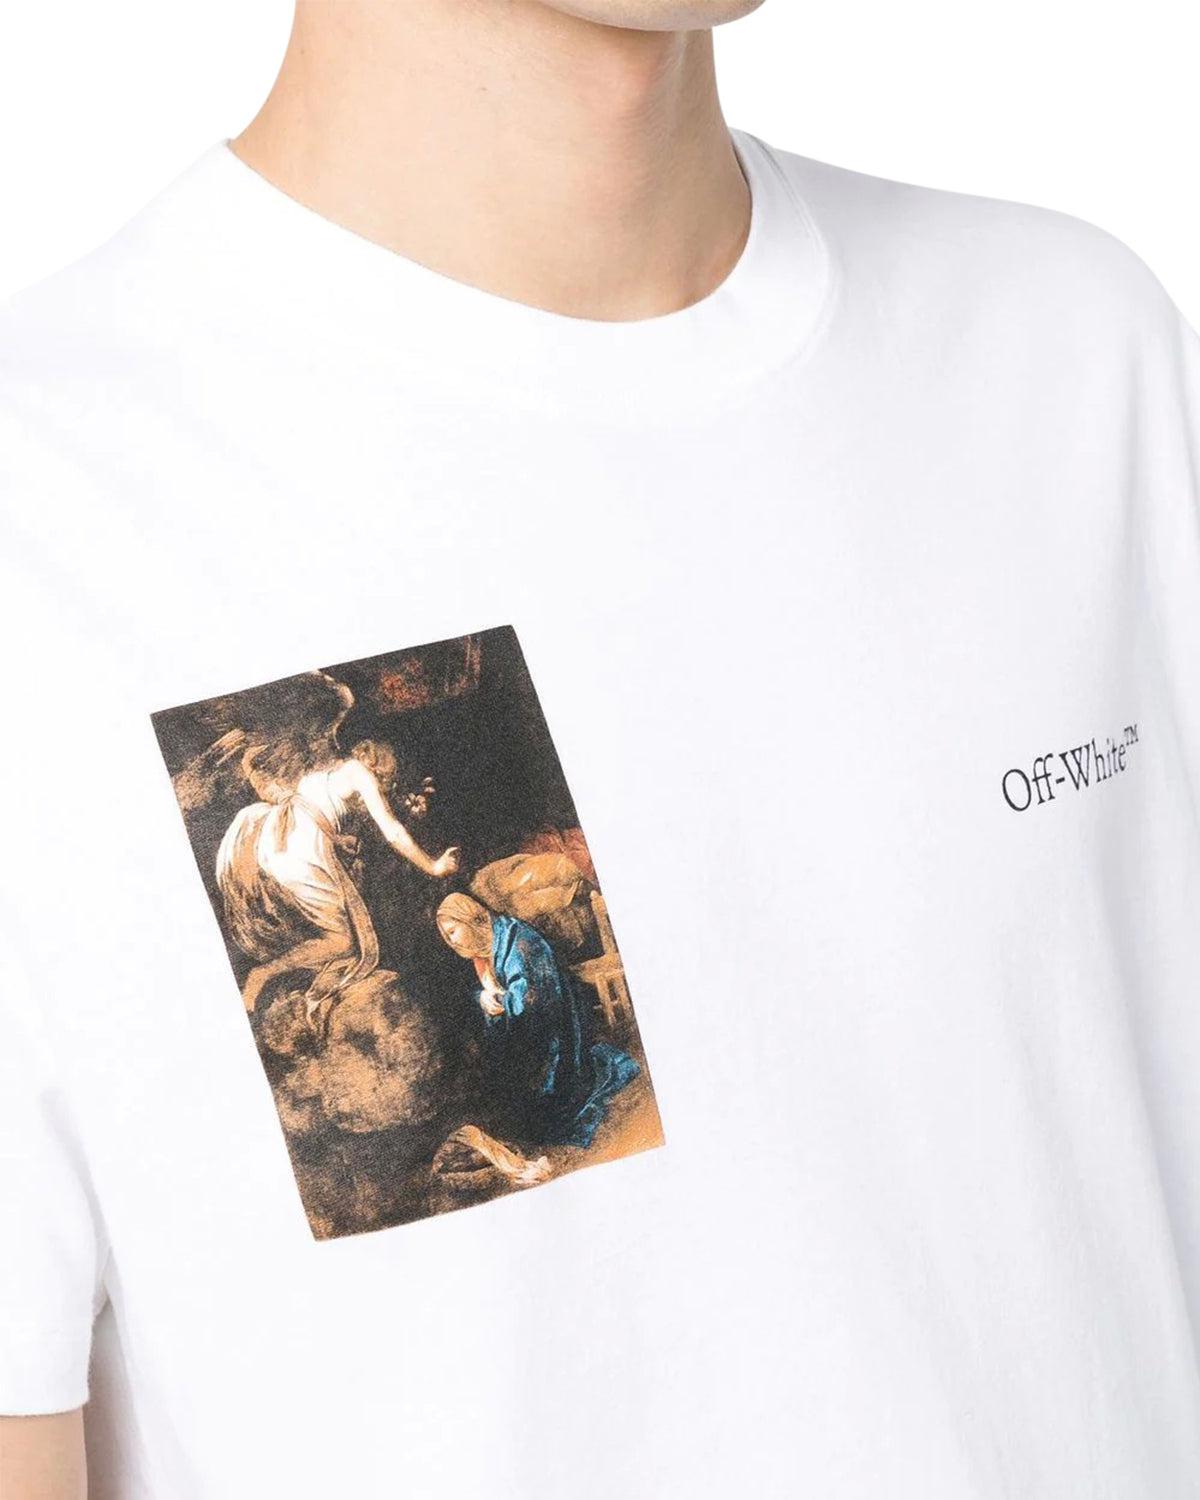 OFF-WHITE MENS CARAVAGGIO LUTE T-SHIRT WHITE – Designer Outlet Sales